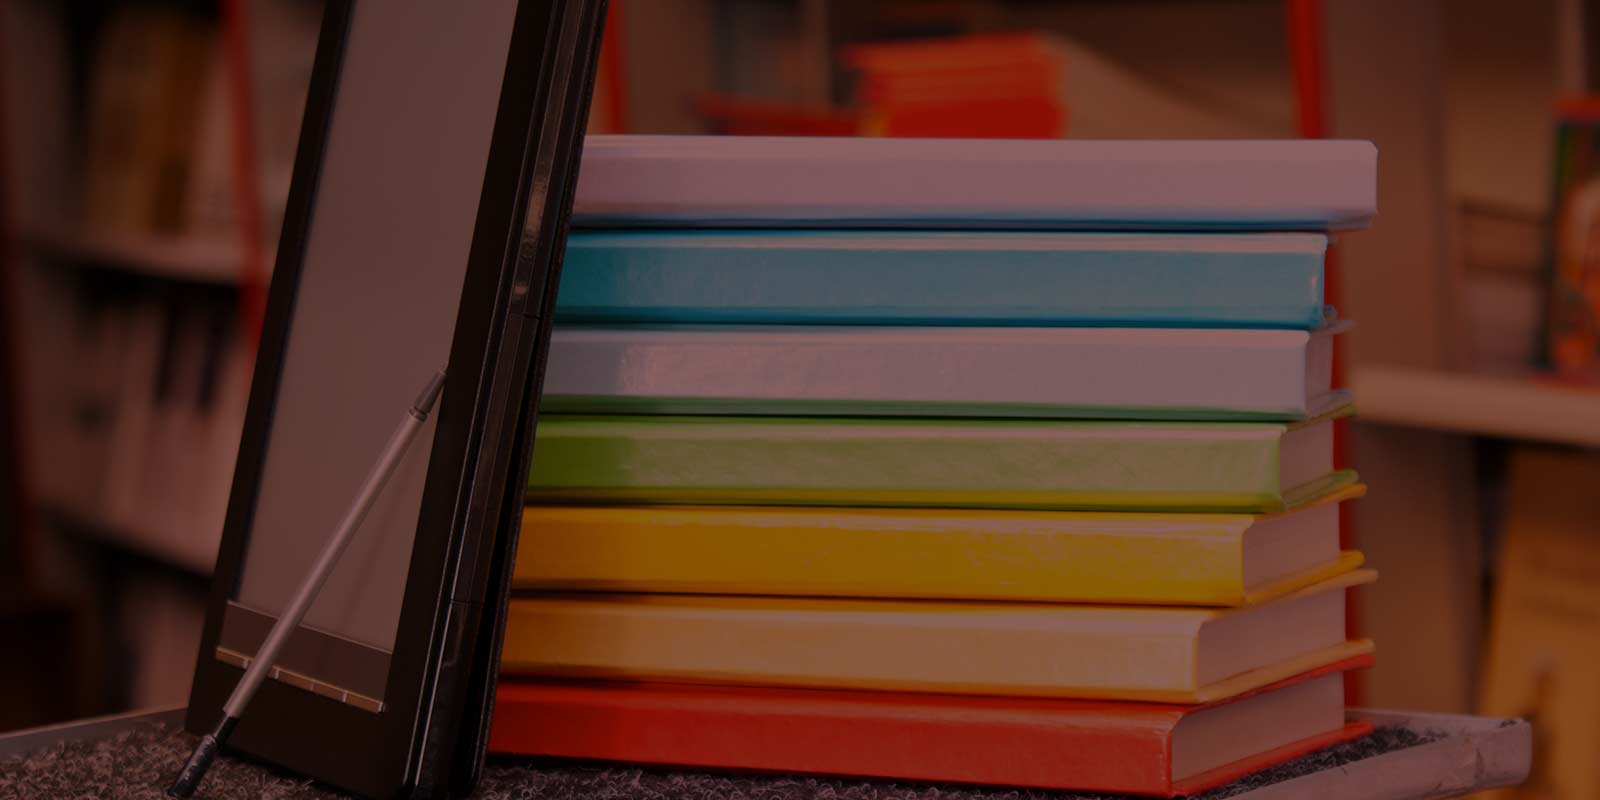 Some blank books with a tablet and stylus in front, books have no writing on the spine, they are colourful